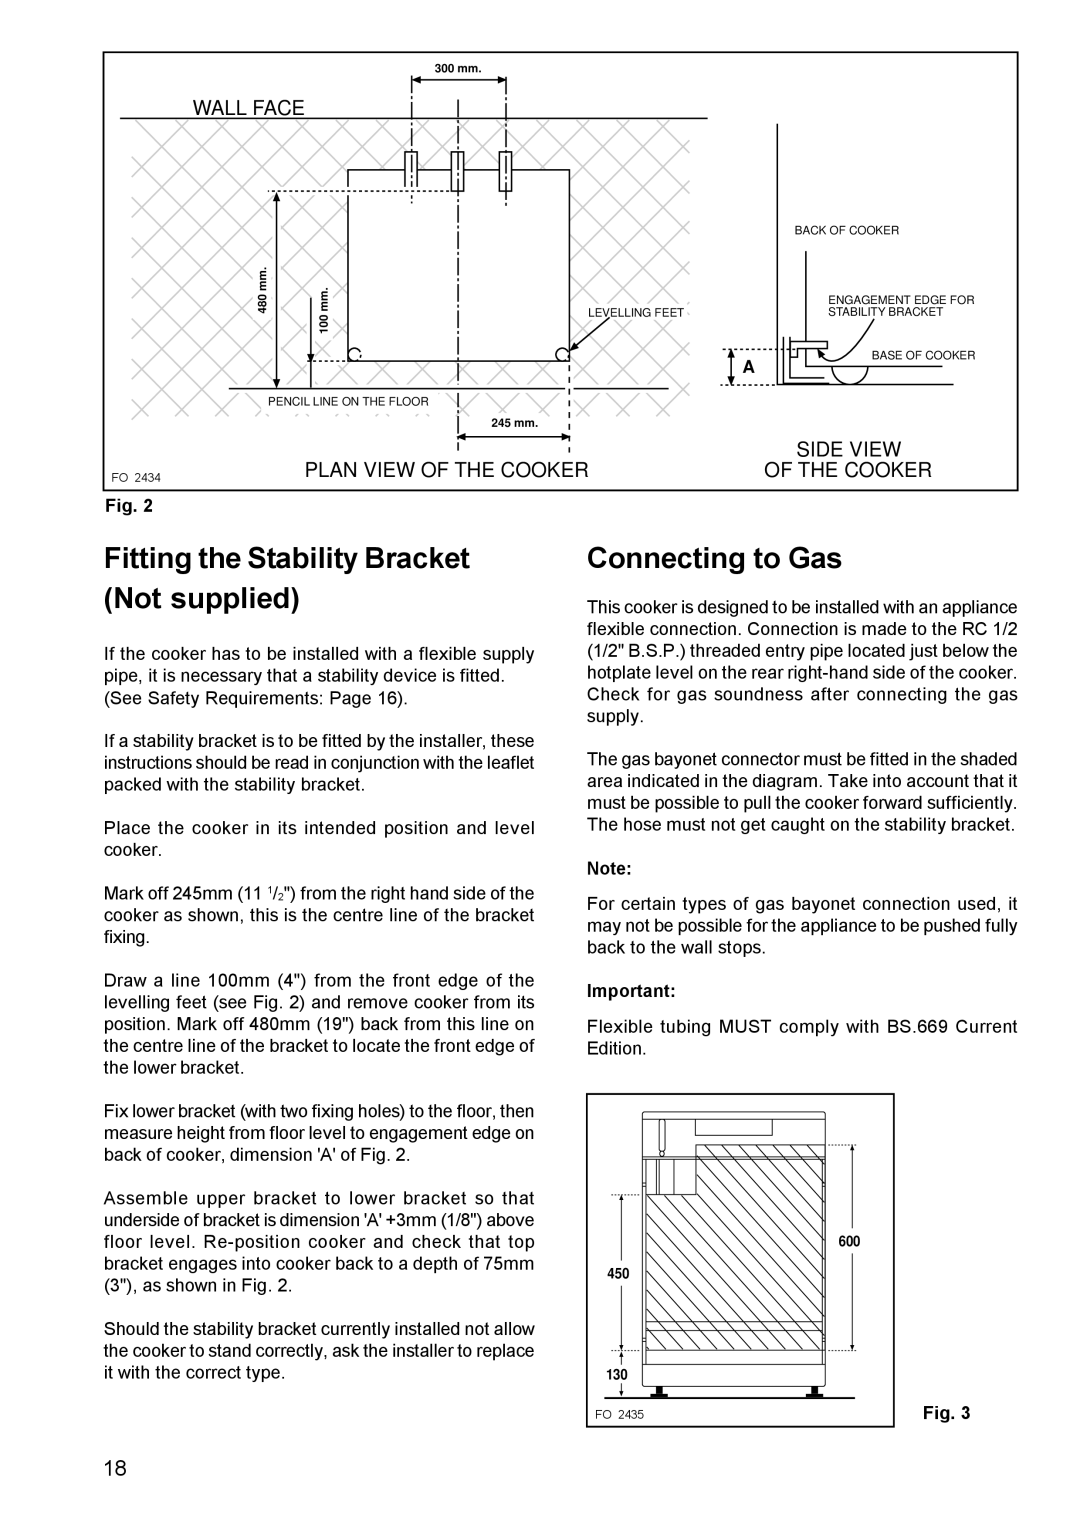 Electrolux SIG 224 G manual Fitting the Stability Bracket Not supplied, Connecting to Gas 